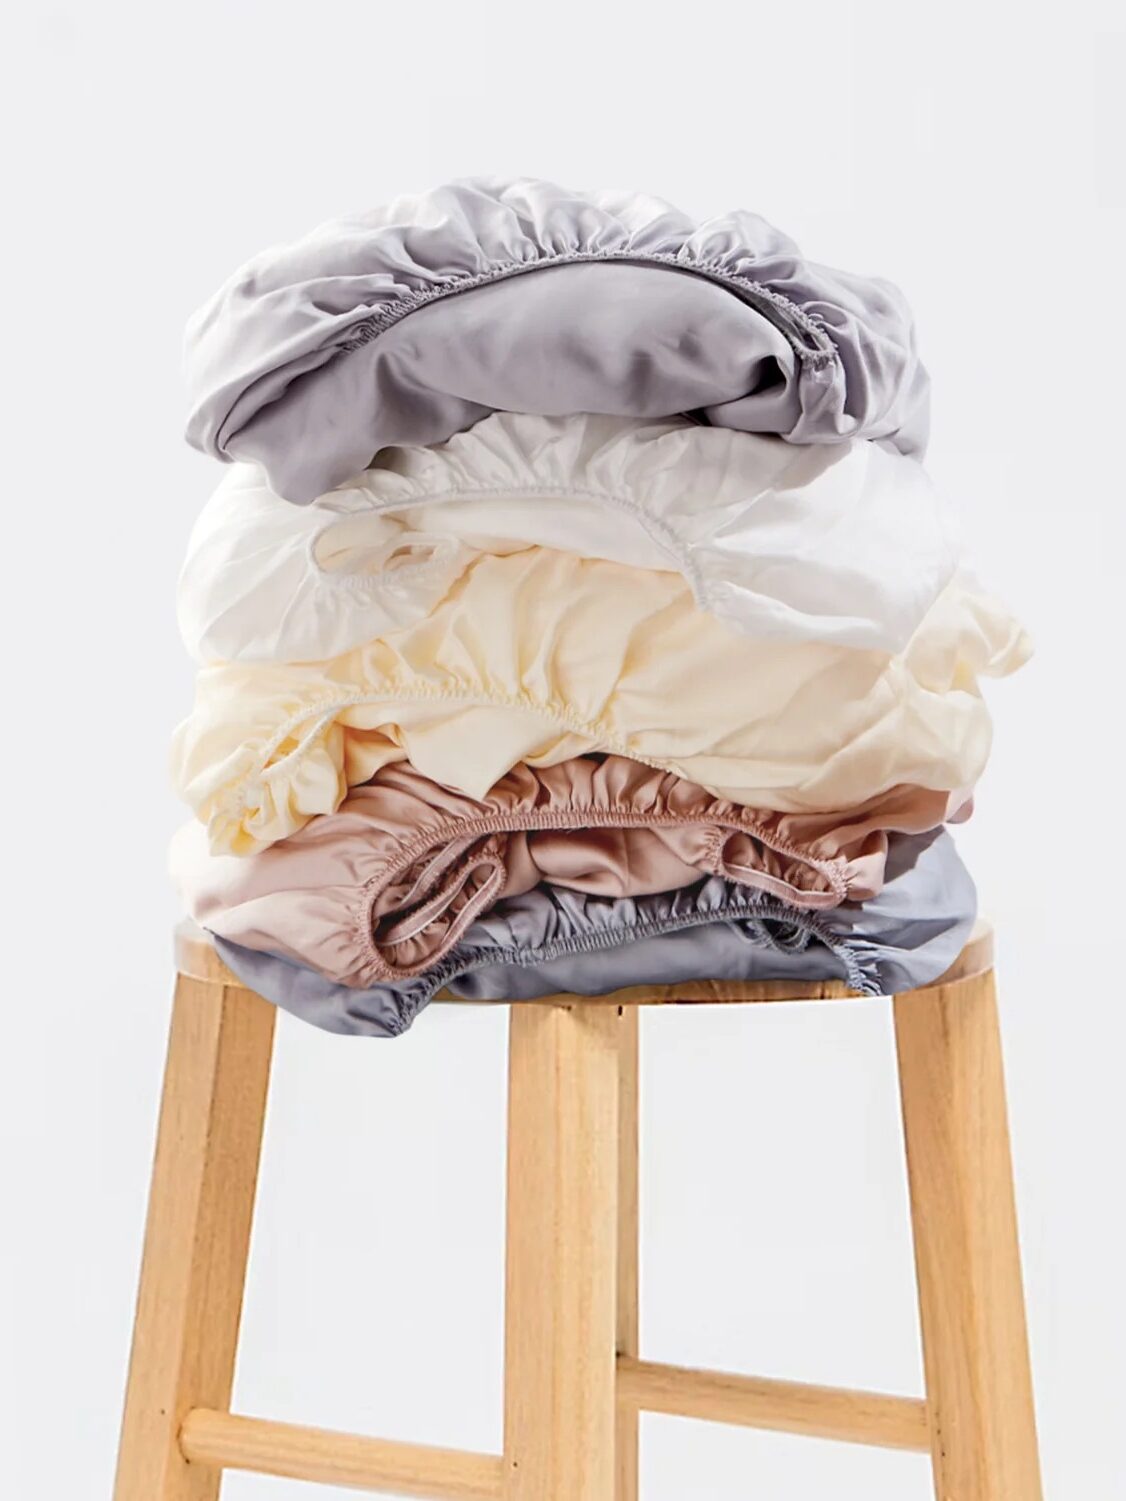 A stack of folded fitted sheets in various pastel colors is placed on a wooden stool against a plain white background.